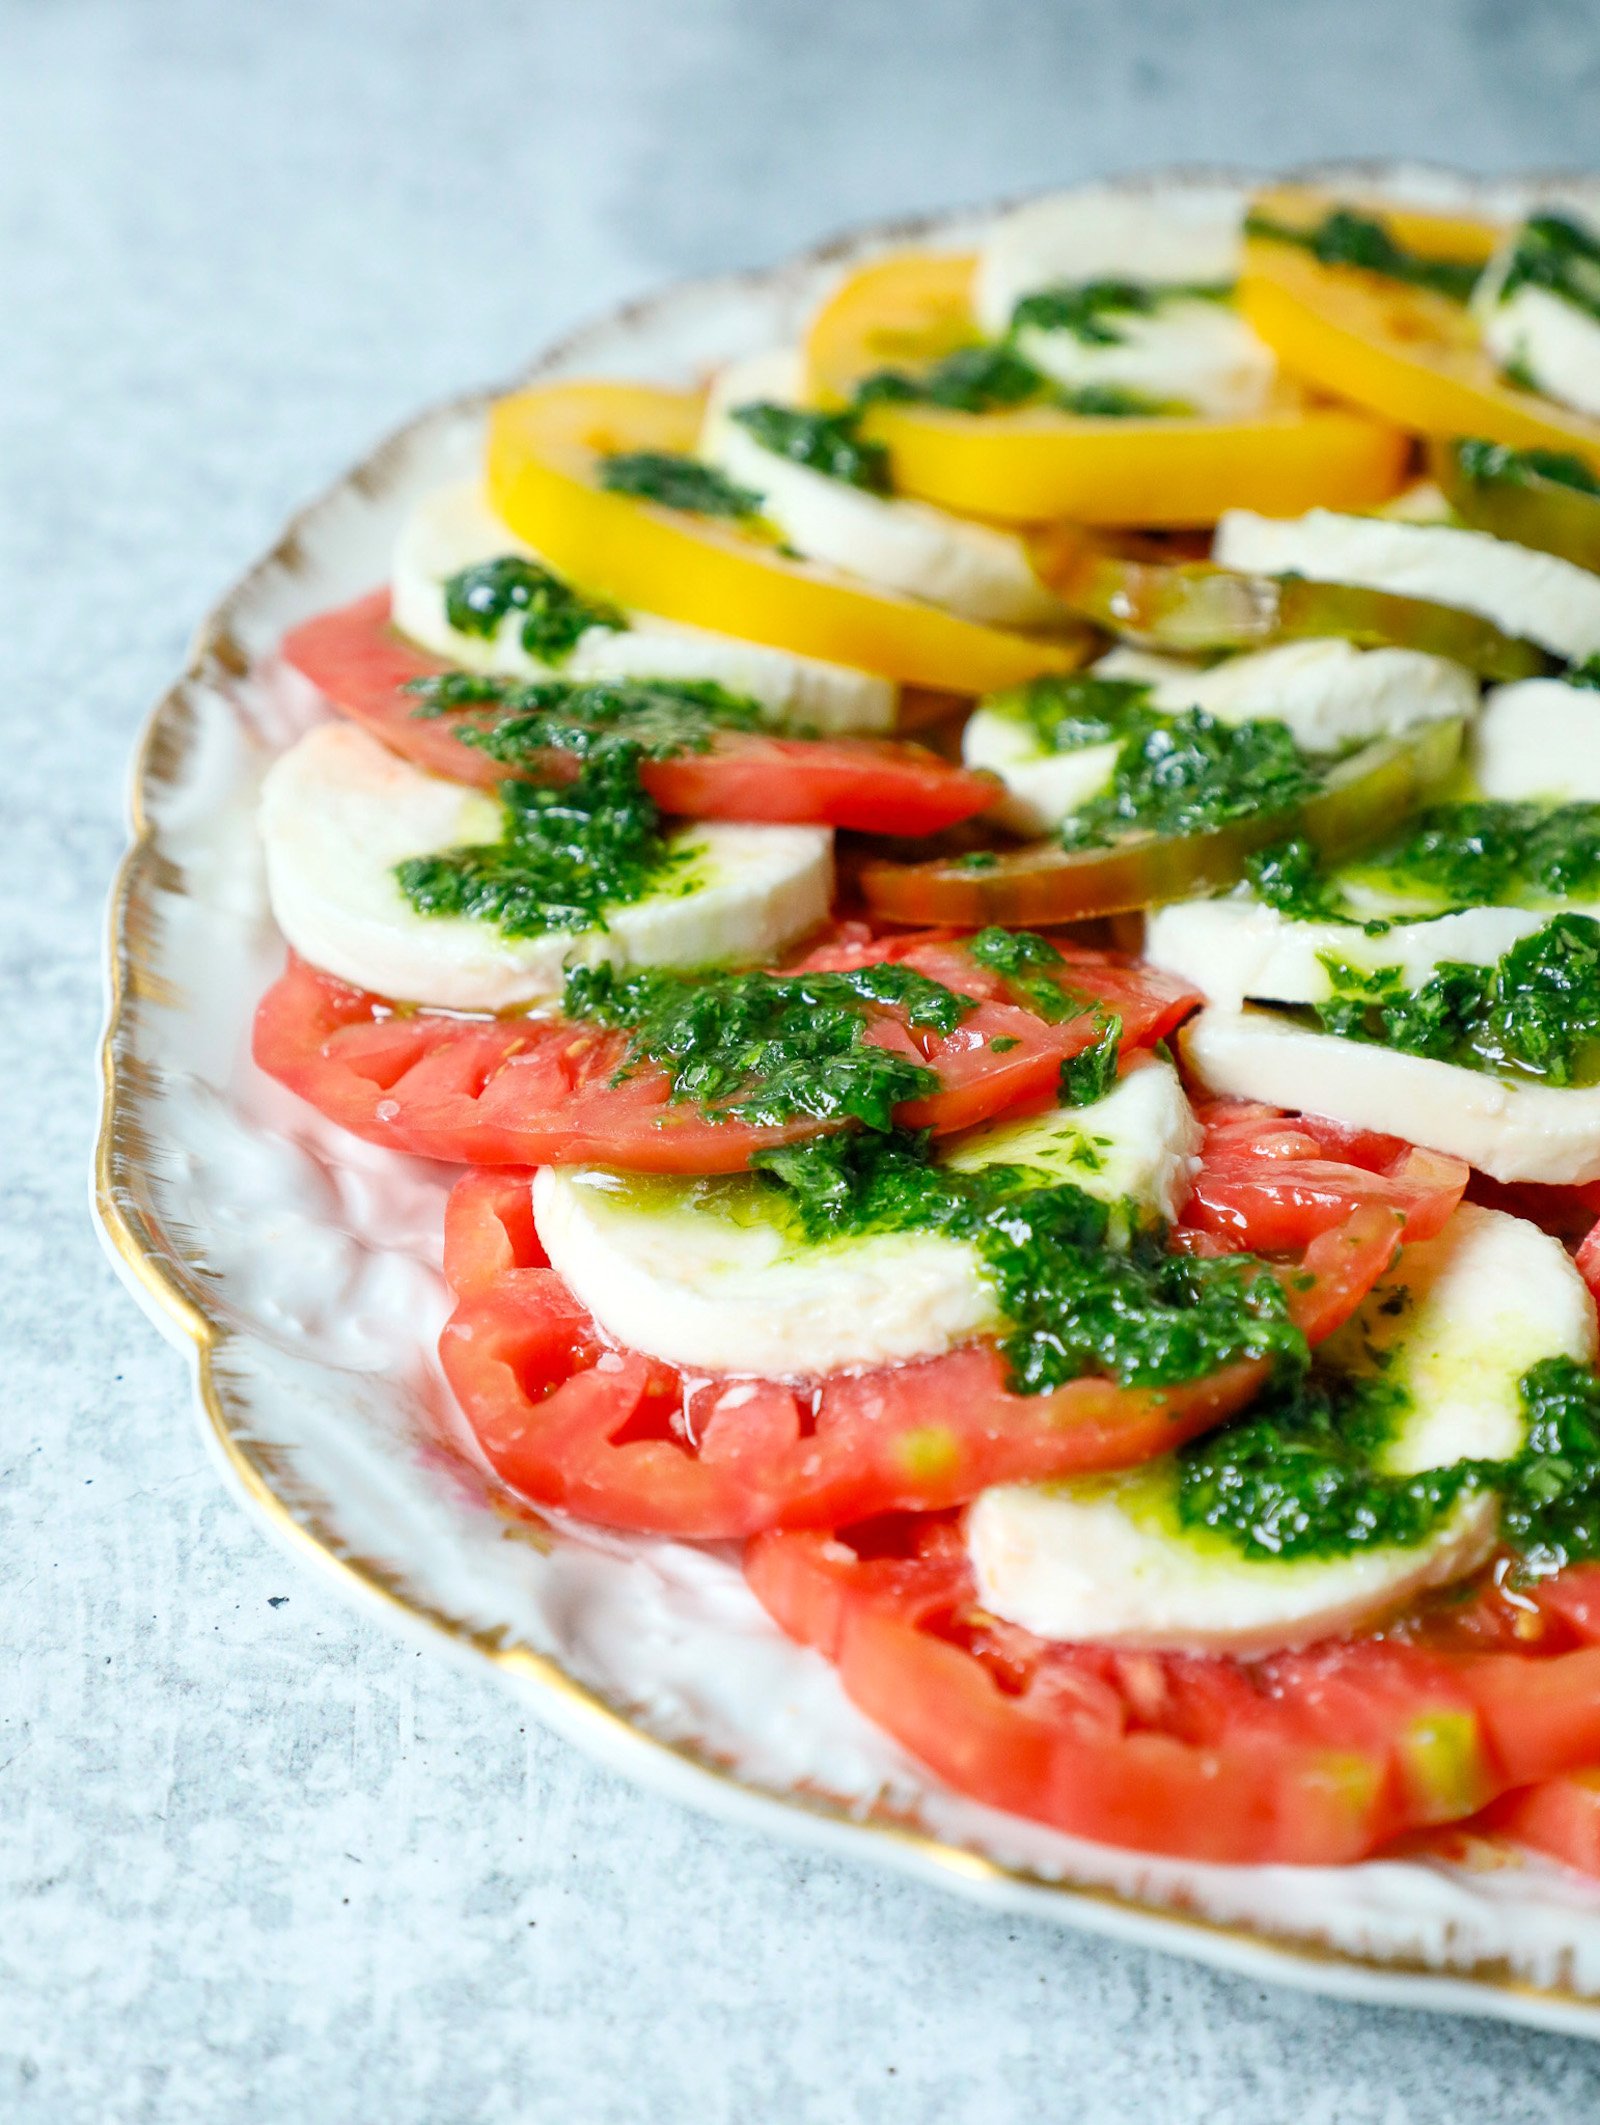 Front view of a caprese salad showing layers of red and yellow tomato with slices of fresh mozzarella and drizzled with basil oil.